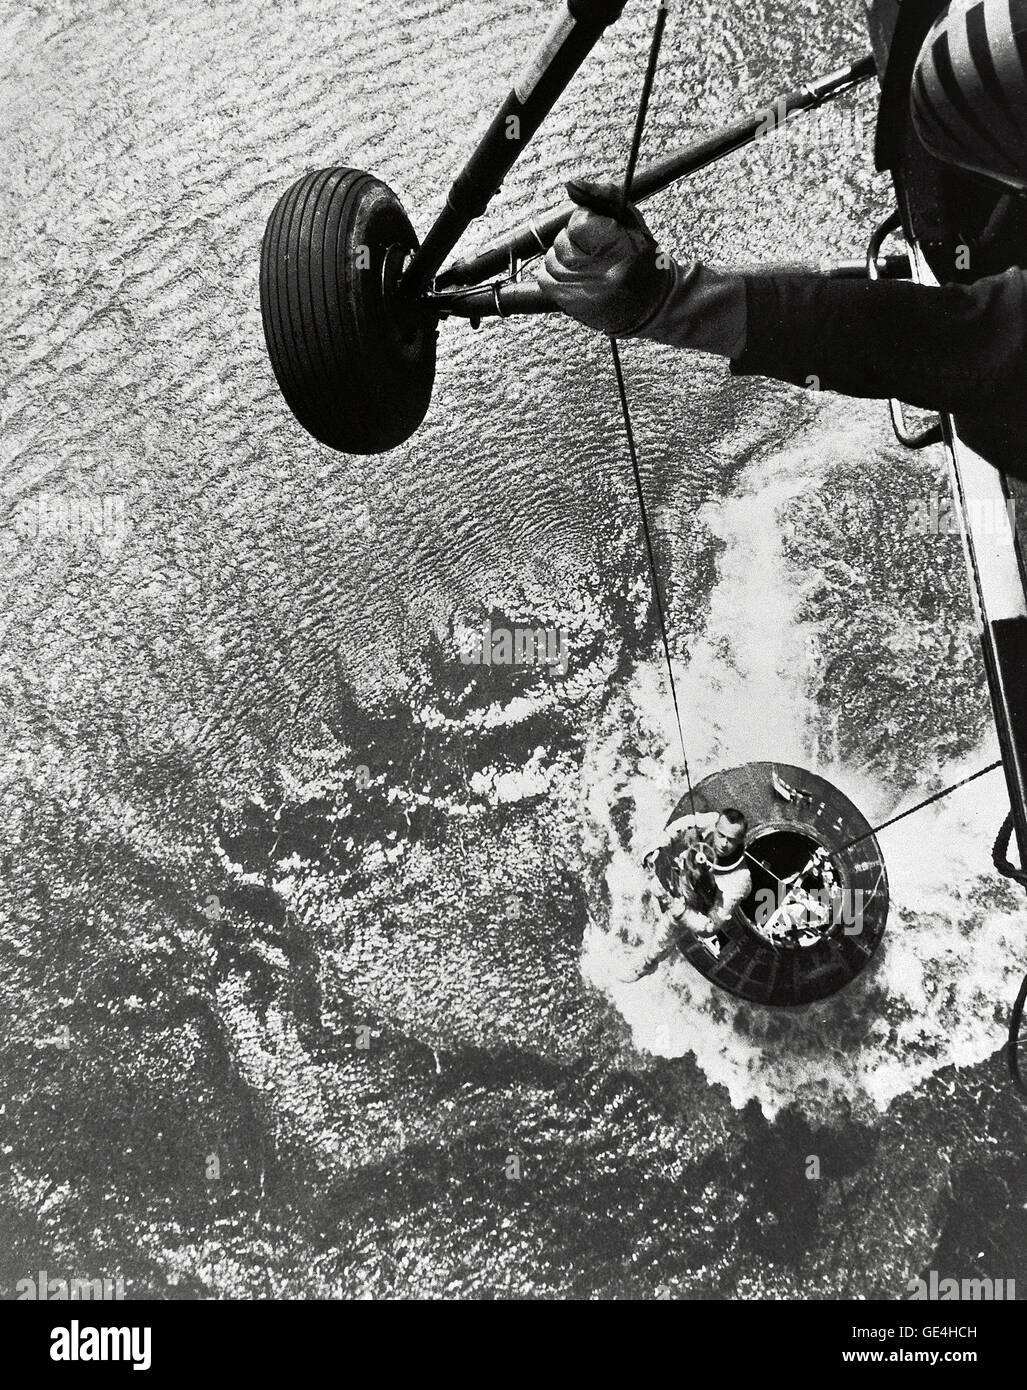 A U.S. Marine helicopter recovery team hoists astronaut Alan Shepard from his Mercury spacecraft after a successful flight and splashdown in the Atlantic Ocean. On May 5th 1961, Alan B. Shepard Jr. became the first American to fly into space. His Freedom 7 Mercury capsule flew a suborbital trajectory lasting 15 minutes 22 seconds. His spacecraft landed in the Atlantic Ocean where he and his capsule were recovered by helicopter and transported to the awaiting aircraft carrier U.S.S. Lake Champlain.  Image # : S61-02723 Stock Photo